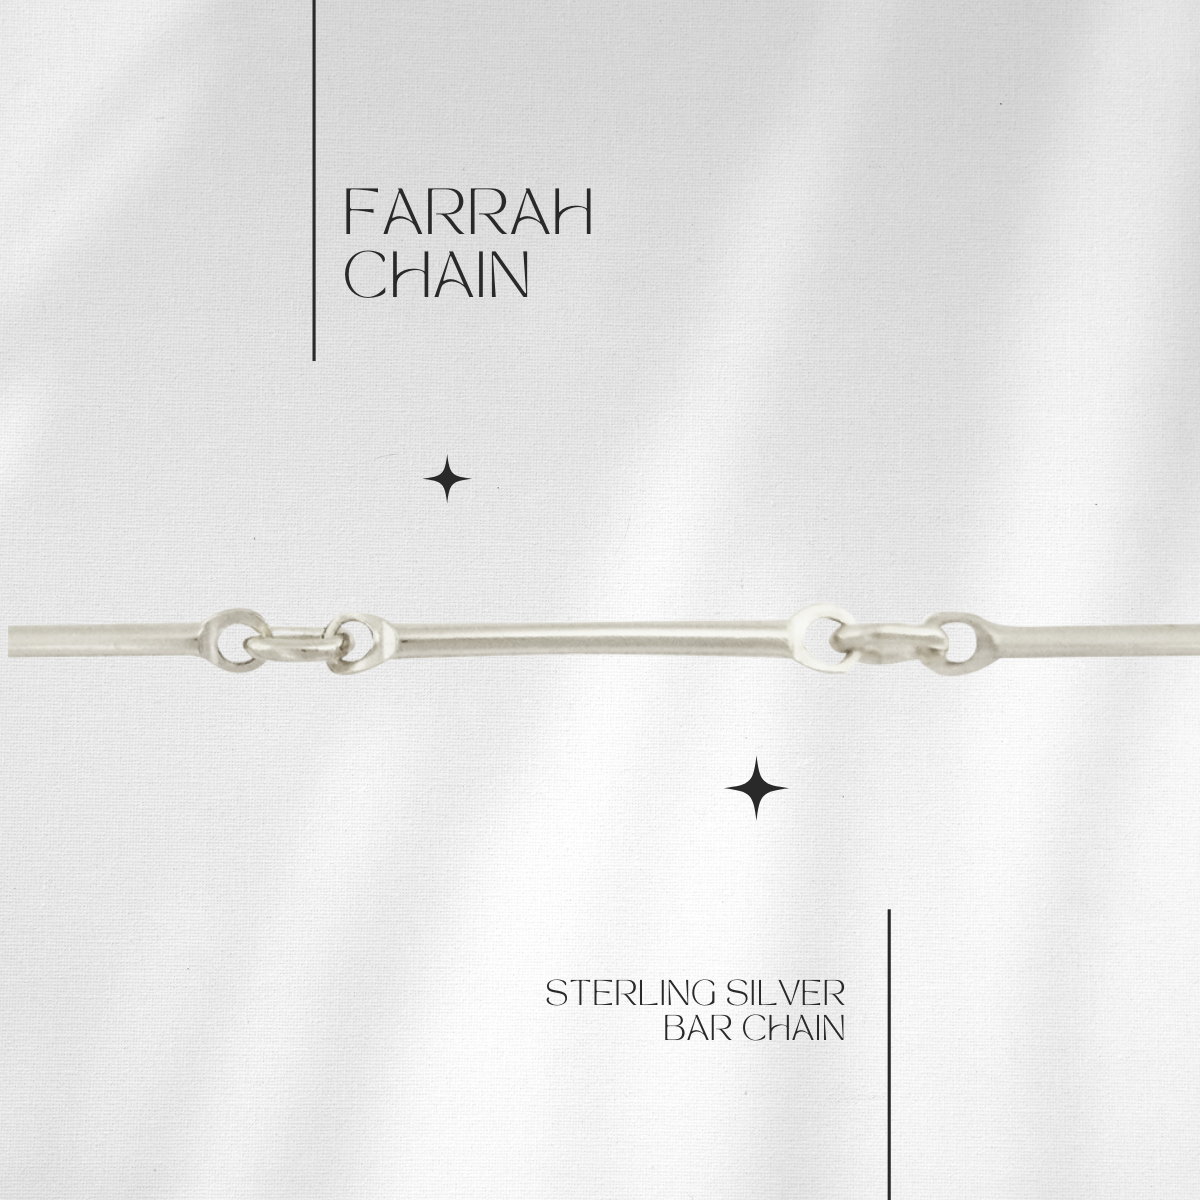 Farrah Bar Chain in Sterling // RESERVATION  for IN-PERSON Permanent Jewelry